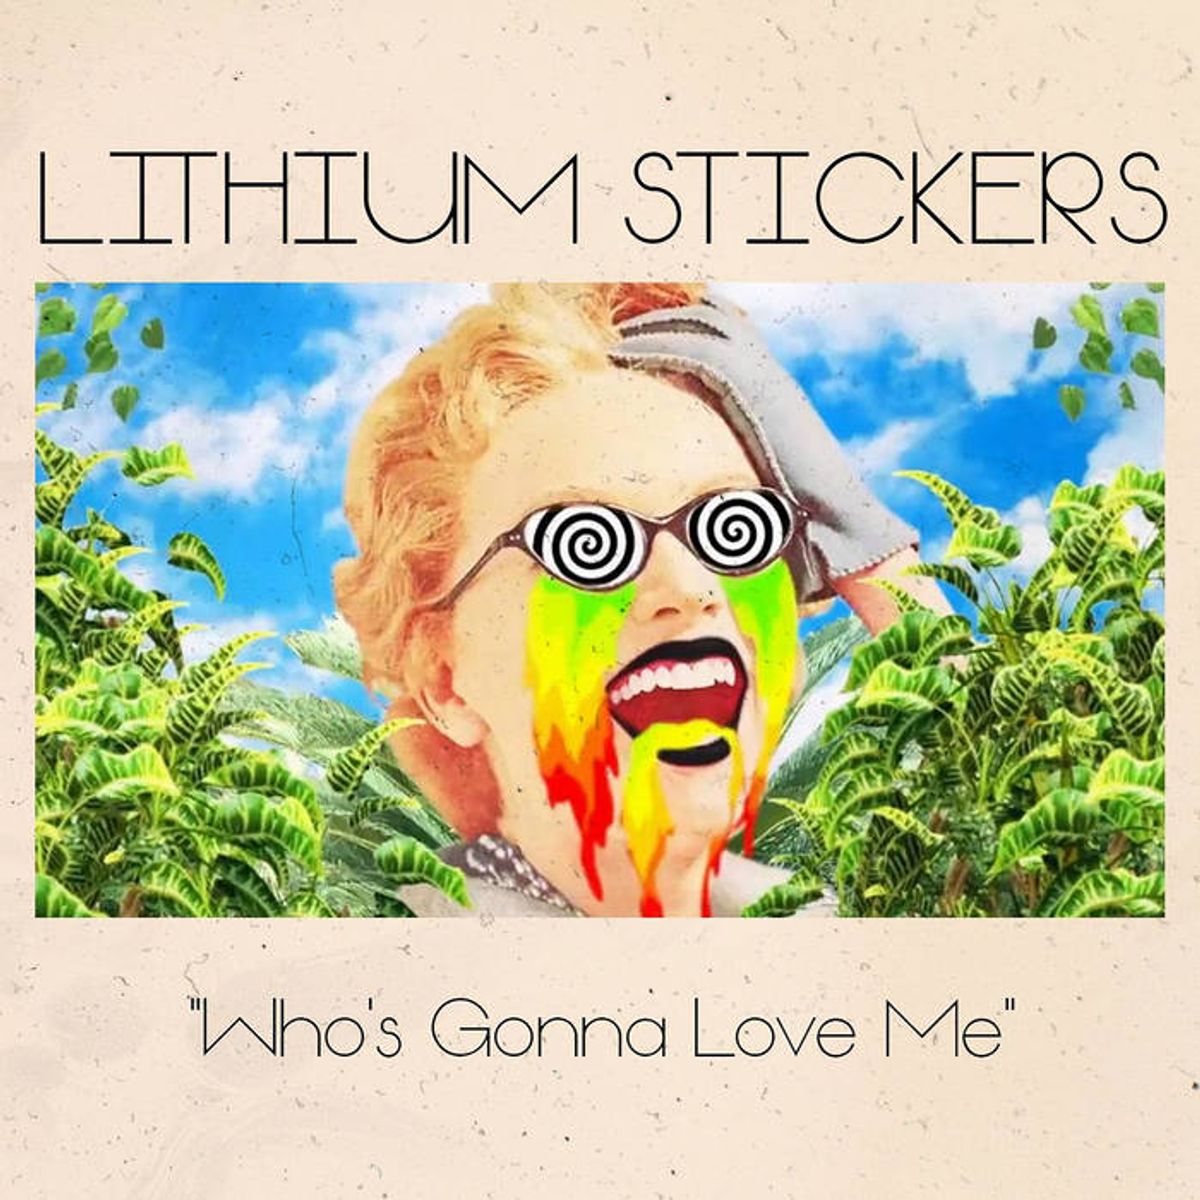 Lithium Stickers - Who's Gonna Love Me?